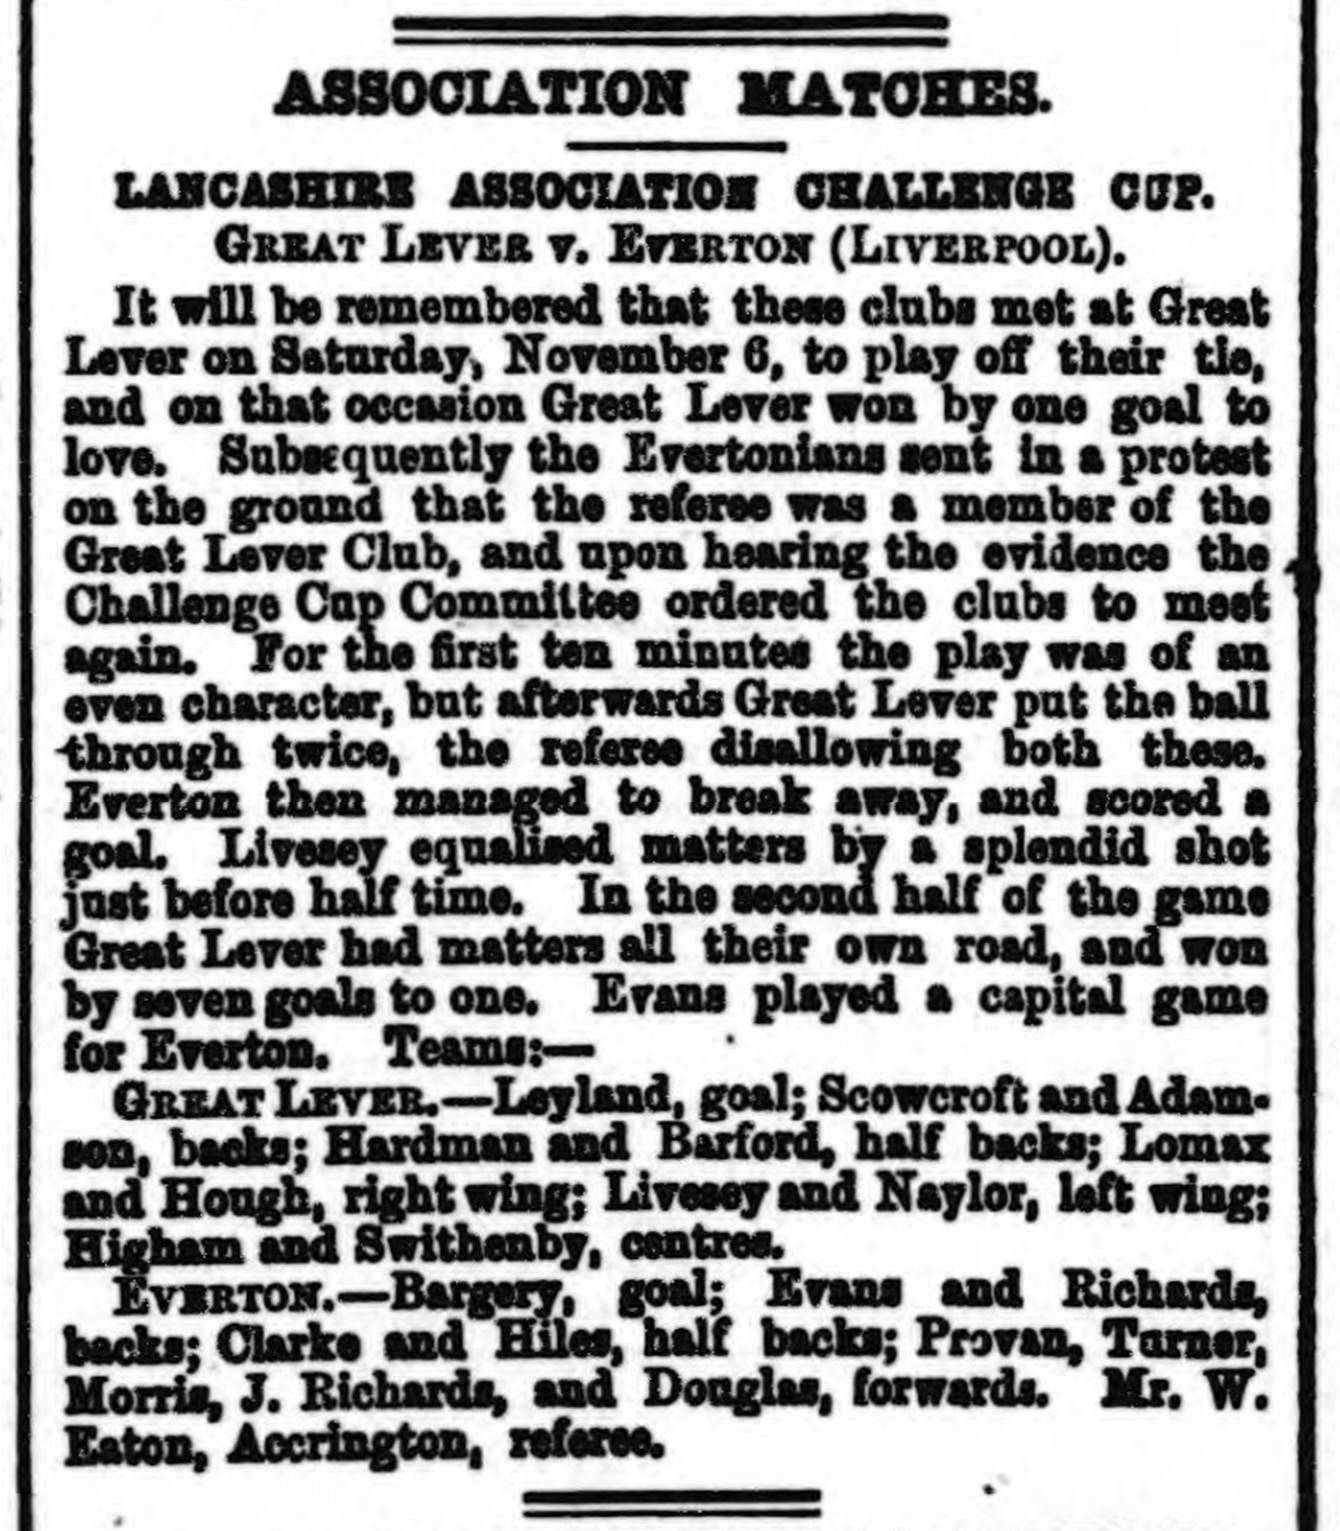 great-lever-v-everton-27-11-1880-athletic-news